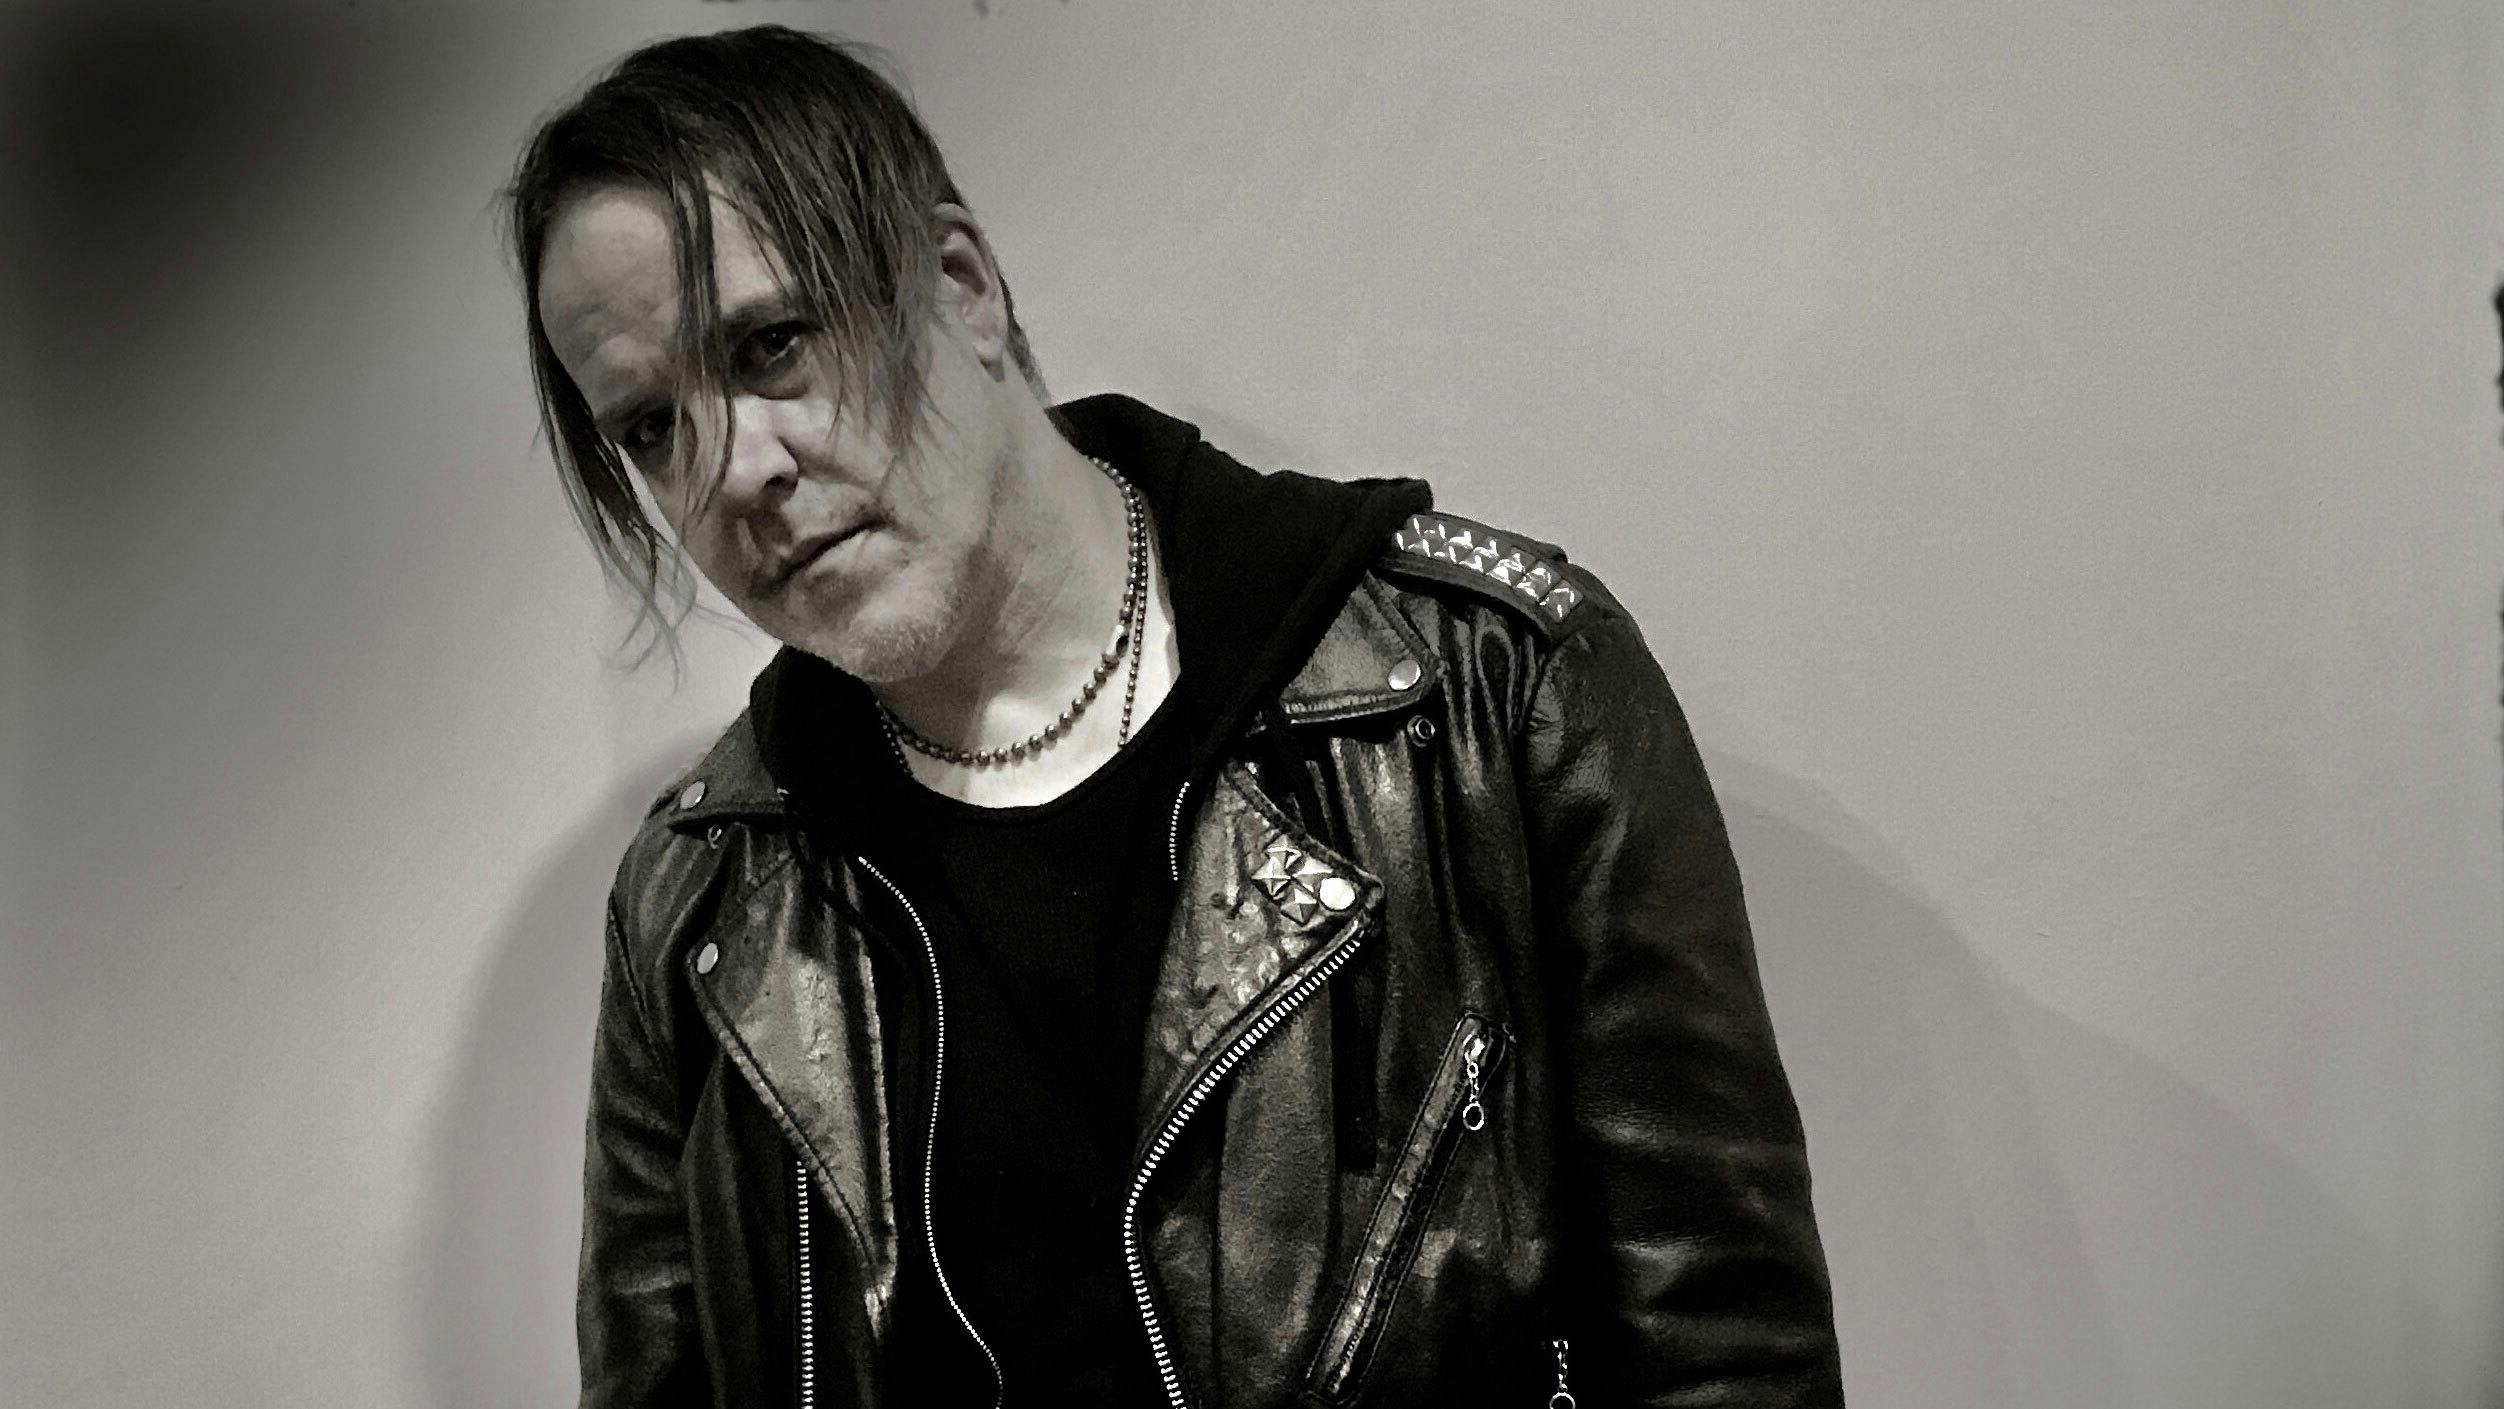 "I'm Proud Of My Legacy… But You Have To Move Forward": Burton C. Bell On Leaving Fear Factory And What's To Come